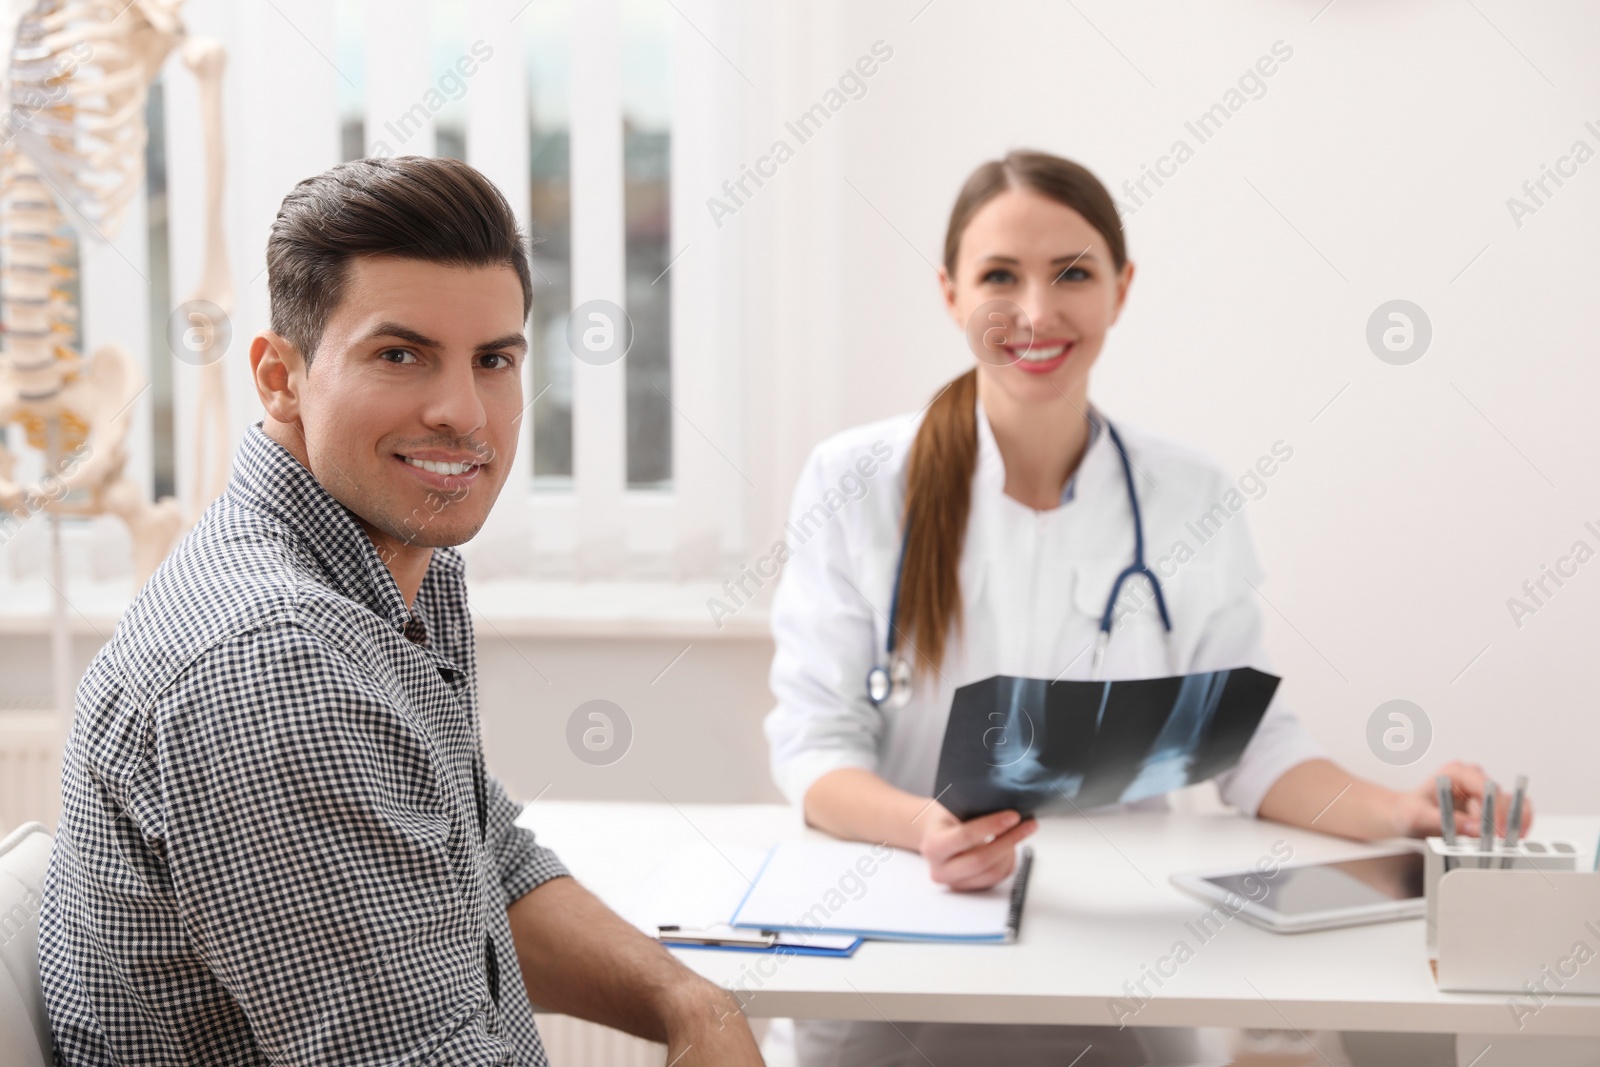 Photo of Orthopedist showing X-ray picture to patient at table in clinic